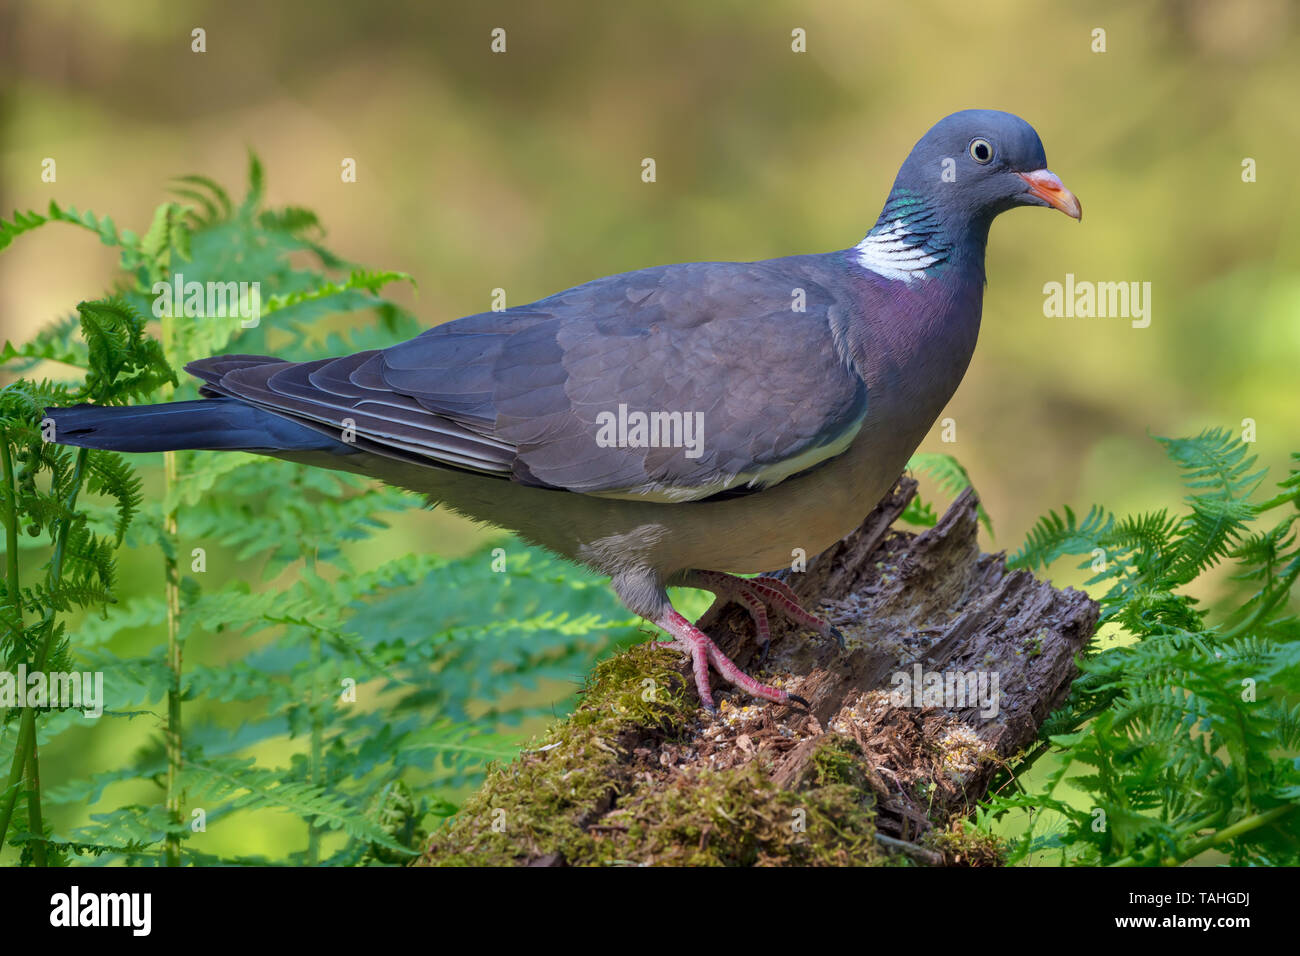 Bright colored Common wood pigeon perched on old branch with moss and ferns in forest Stock Photo